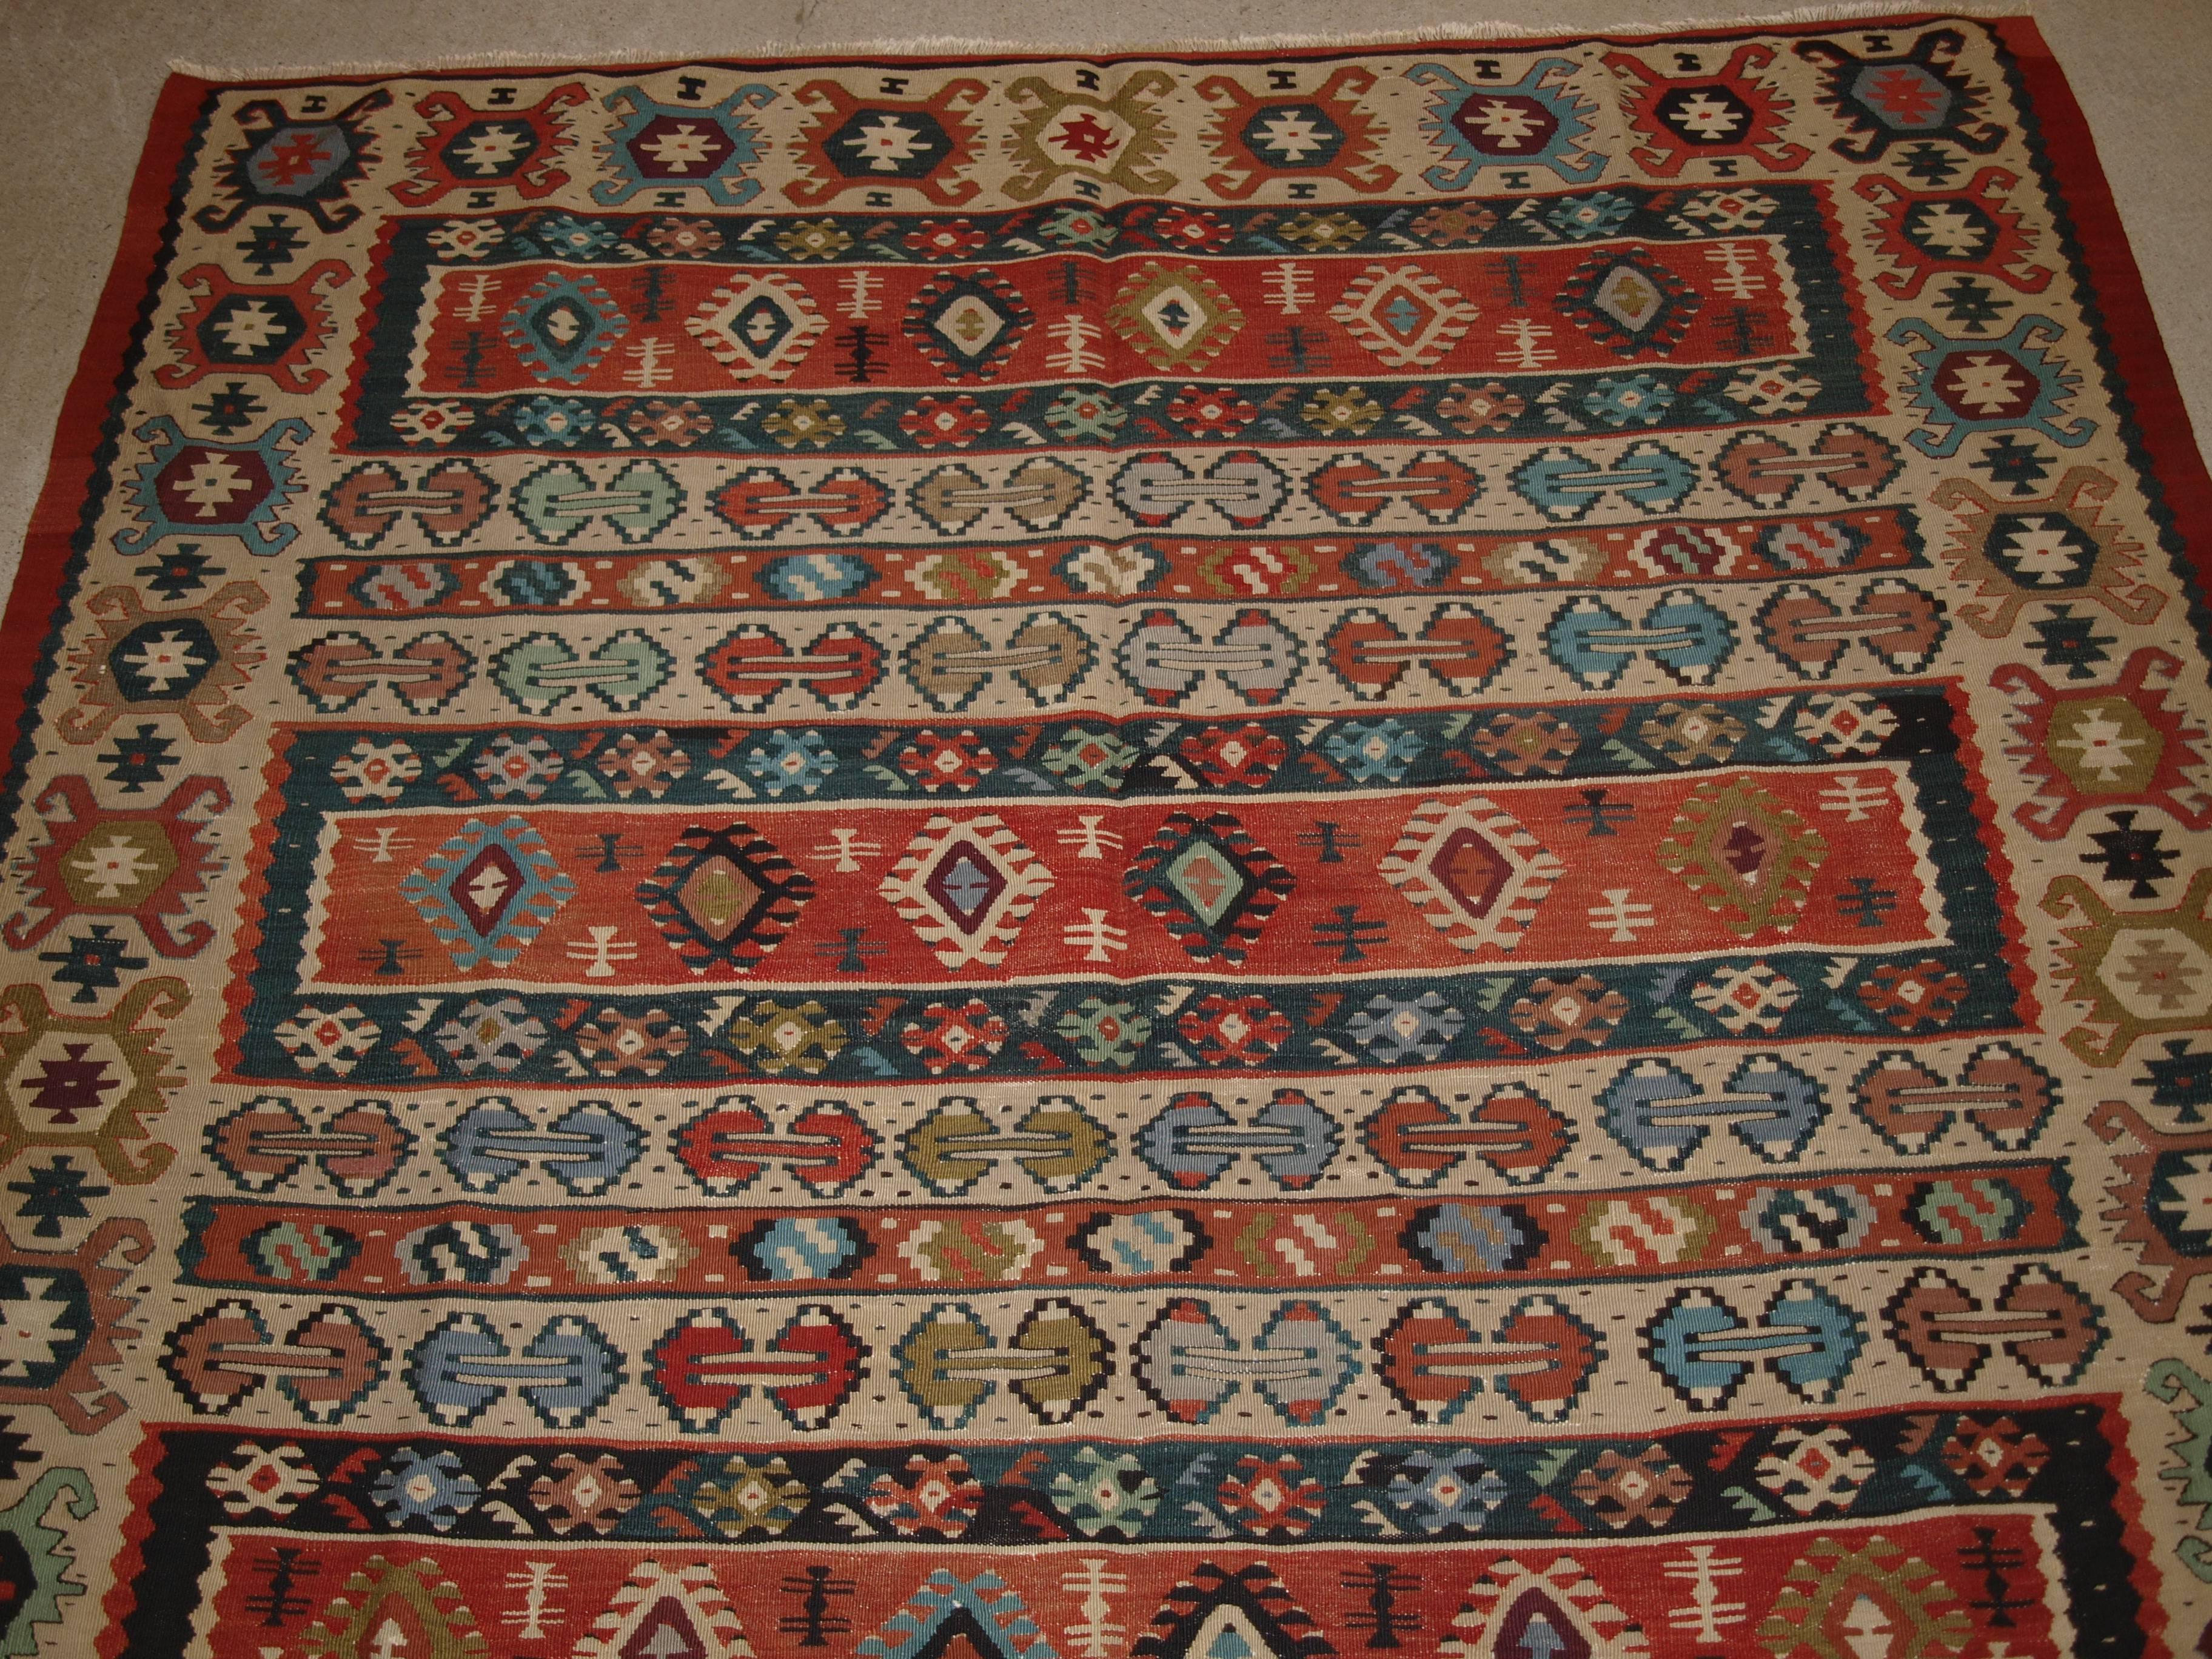 Old Turkish Sarkoy Kilim rug, ivory border, banded design, superb colours, circa 1920.
Size: 8ft 2in x 5ft 0in (248 x 153cm).

Old Anatolian Sharkoy Kilim, Western Turkey

circa 1920

Sharkoy kilims are also known as Sarkoy or Thracian, they